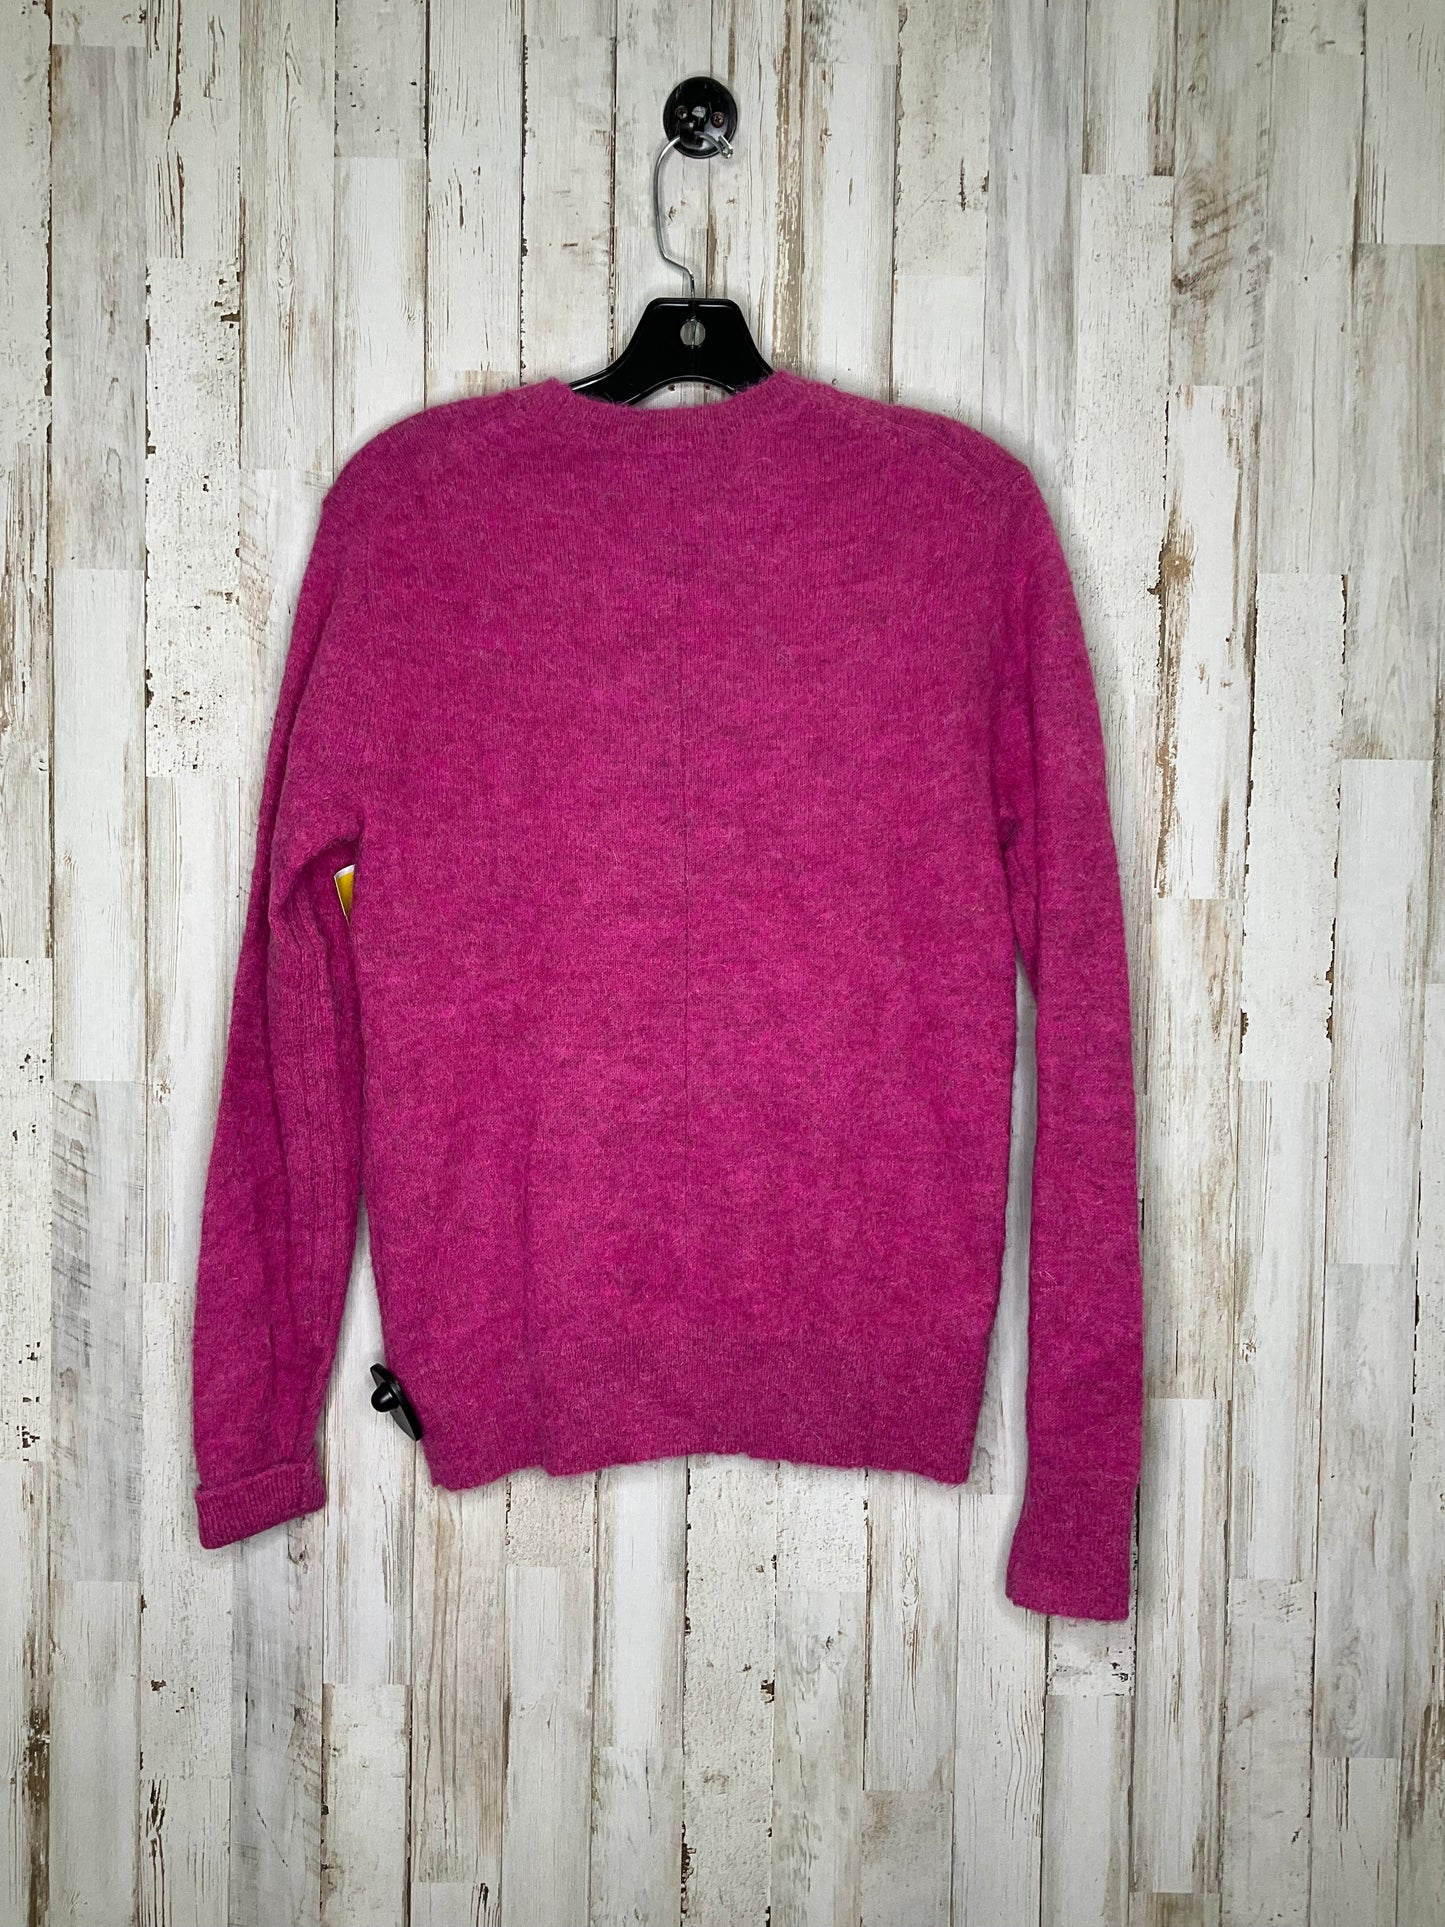 Sweater By Rag And Bone  Size: Xs